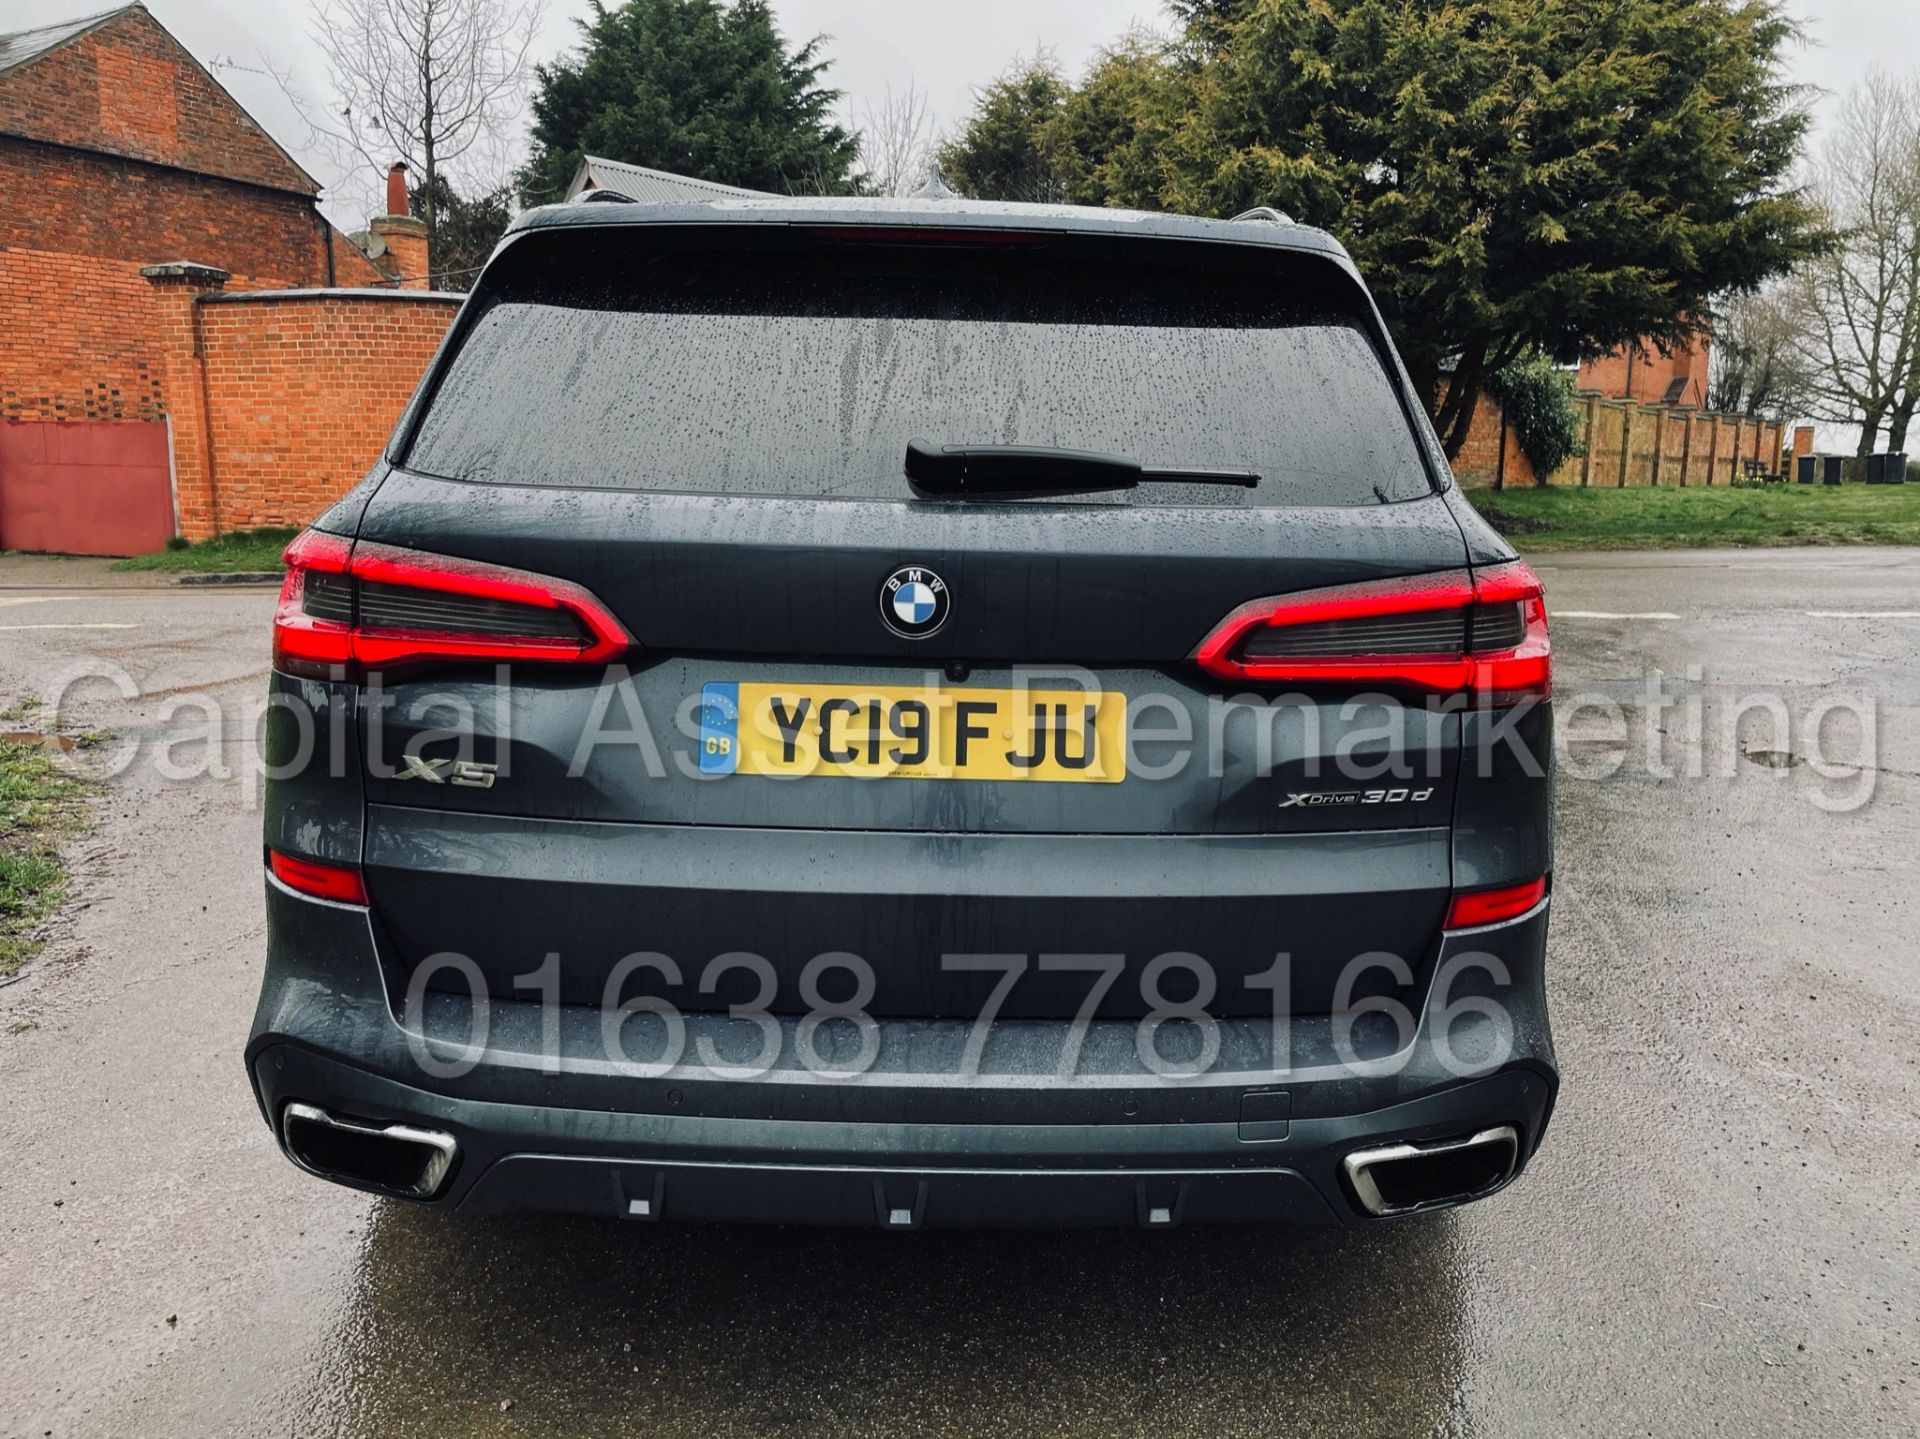 (On Sale) BMW X5 *M SPORT* X-DRIVE *7 SEATER SUV* (2019 - EURO 6) '3.0 DIESEL - AUTO' *PAN ROOF* - Image 11 of 70